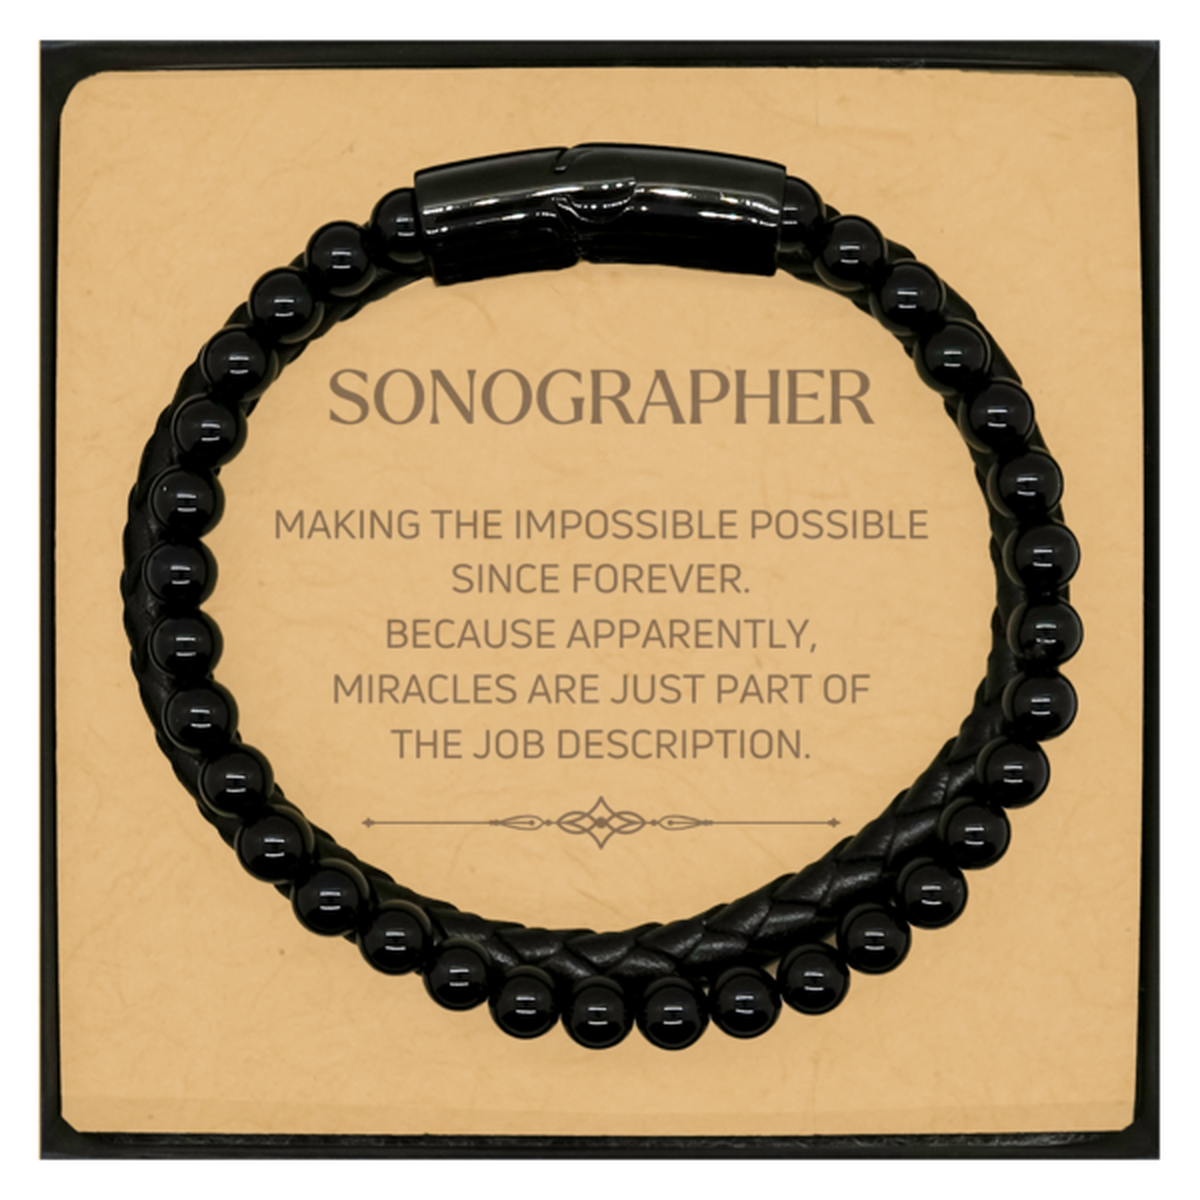 Funny Sonographer Gifts, Miracles are just part of the job description, Inspirational Birthday Christmas Stone Leather Bracelets For Sonographer, Men, Women, Coworkers, Friends, Boss